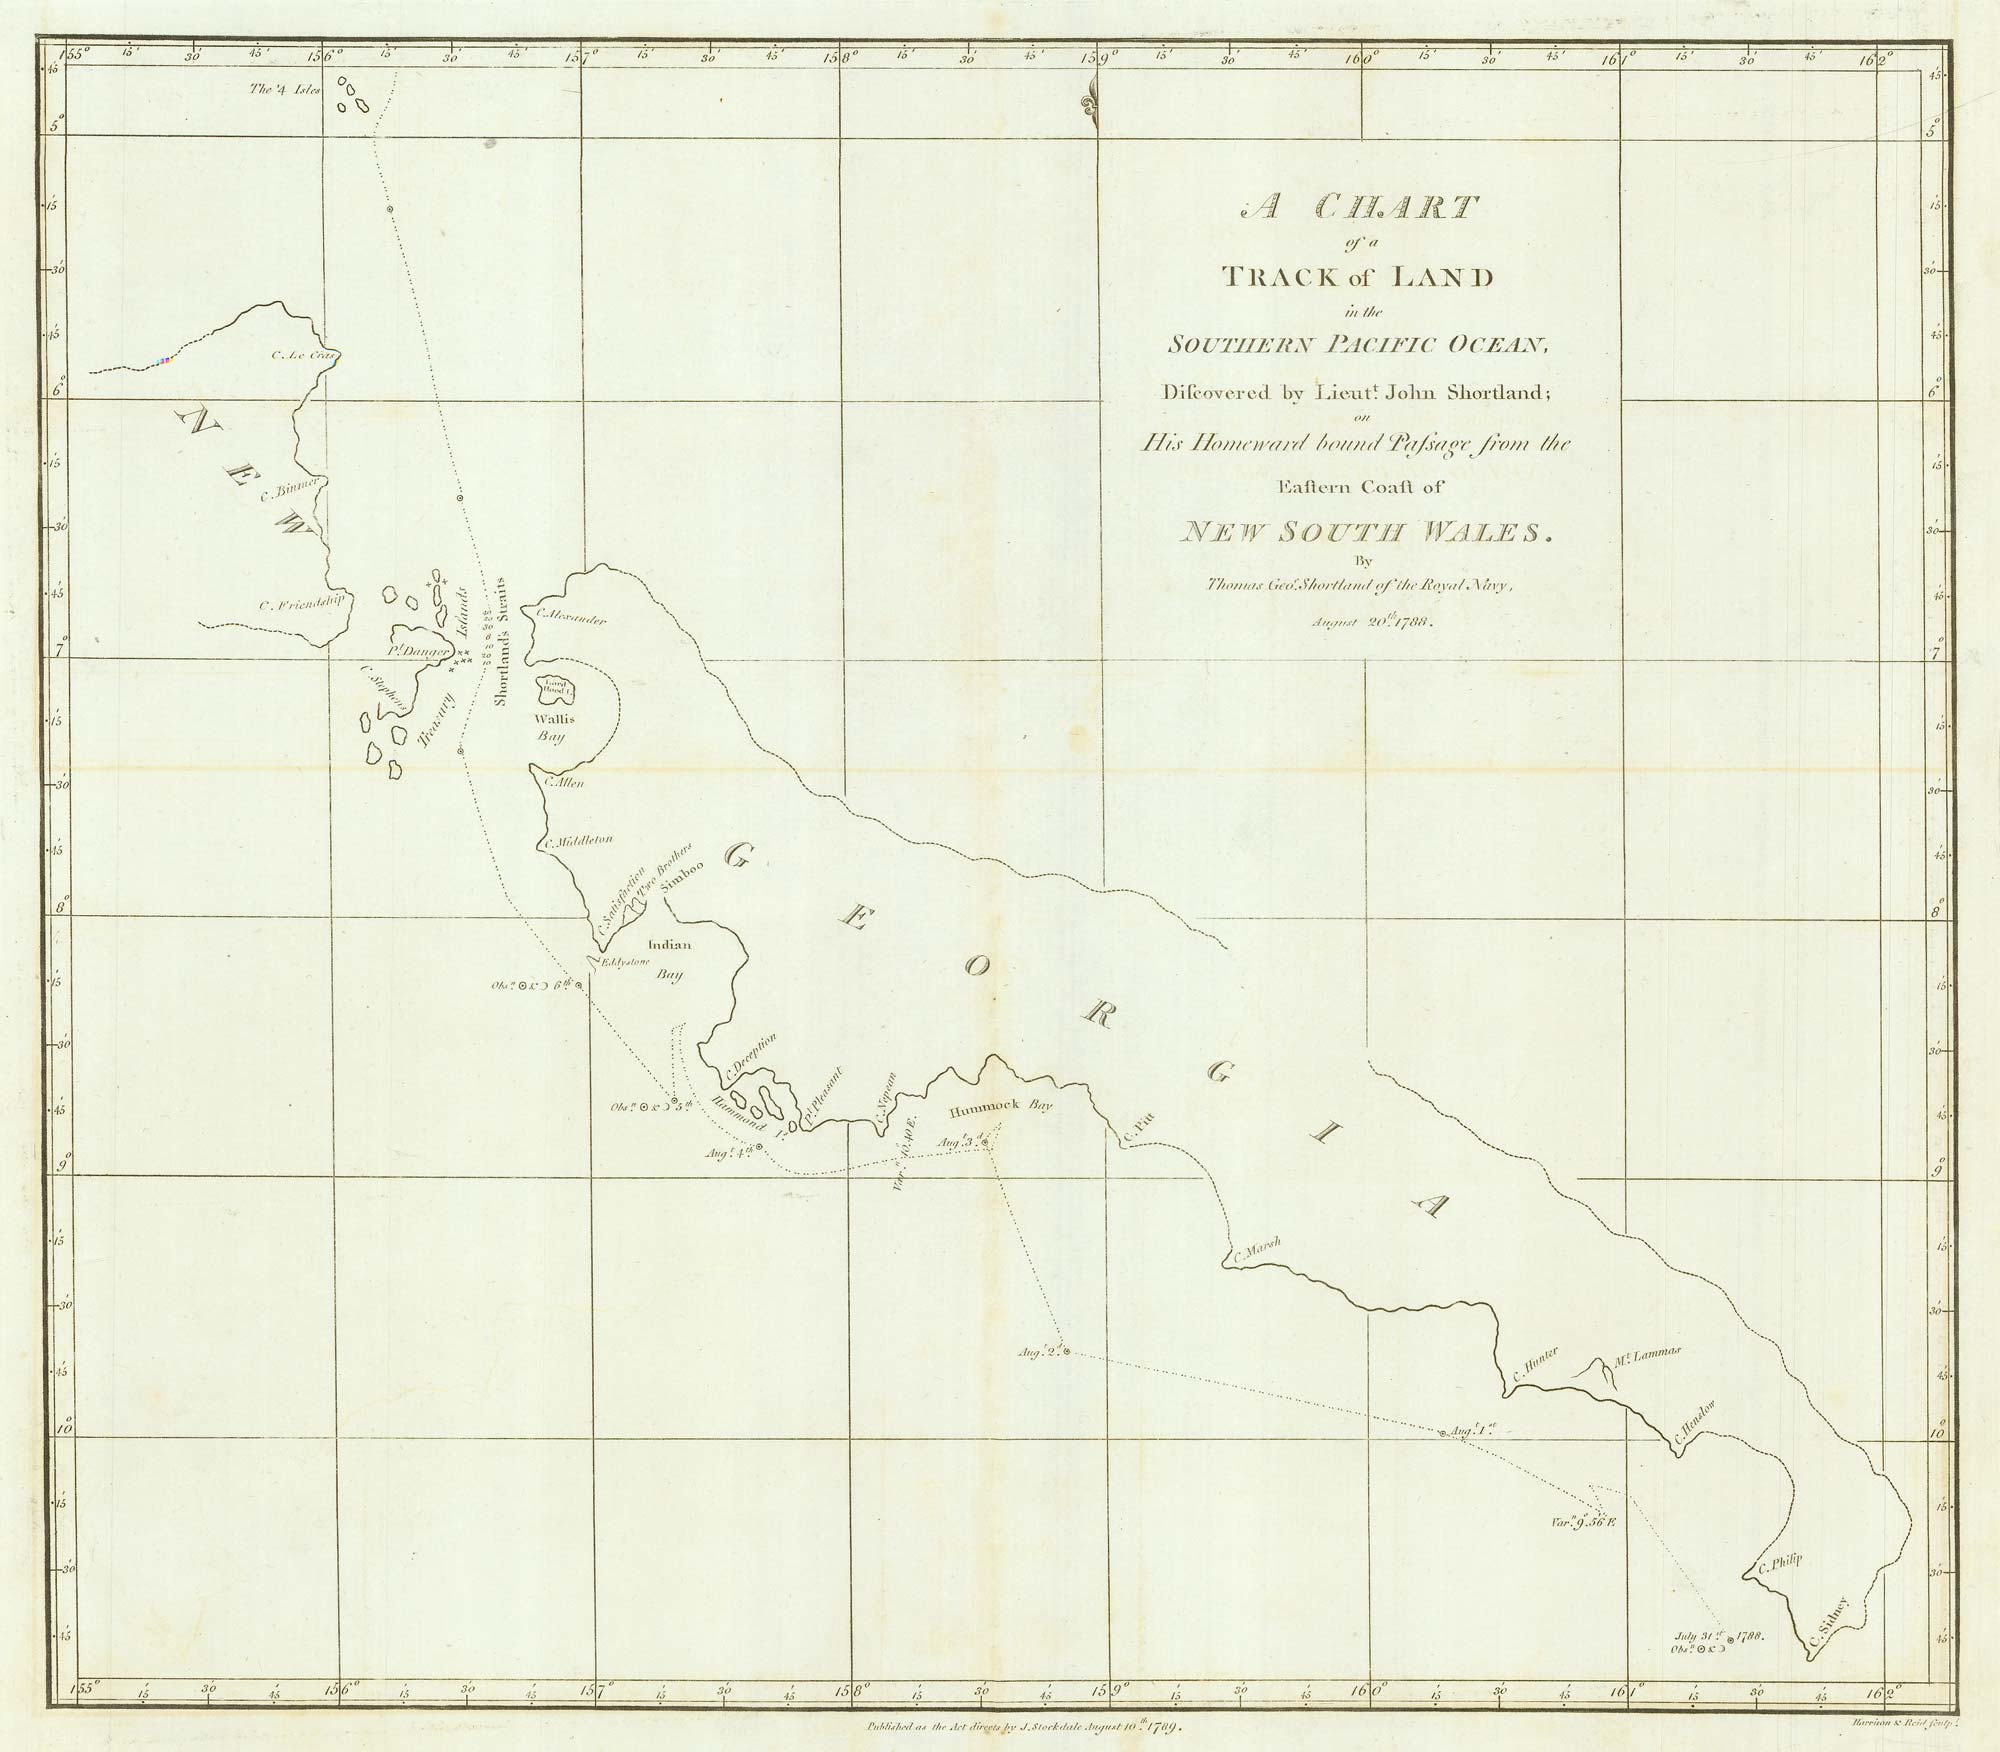 A Chart of the Track of Land in the Pacific Ocean, Discovered by Lieut.t John Shortland; on His Homeward bound Passage from the Eastern Coast of New South Wales. By Thomas Geo.e Shortland of the Royal Navy, August 20th 1788